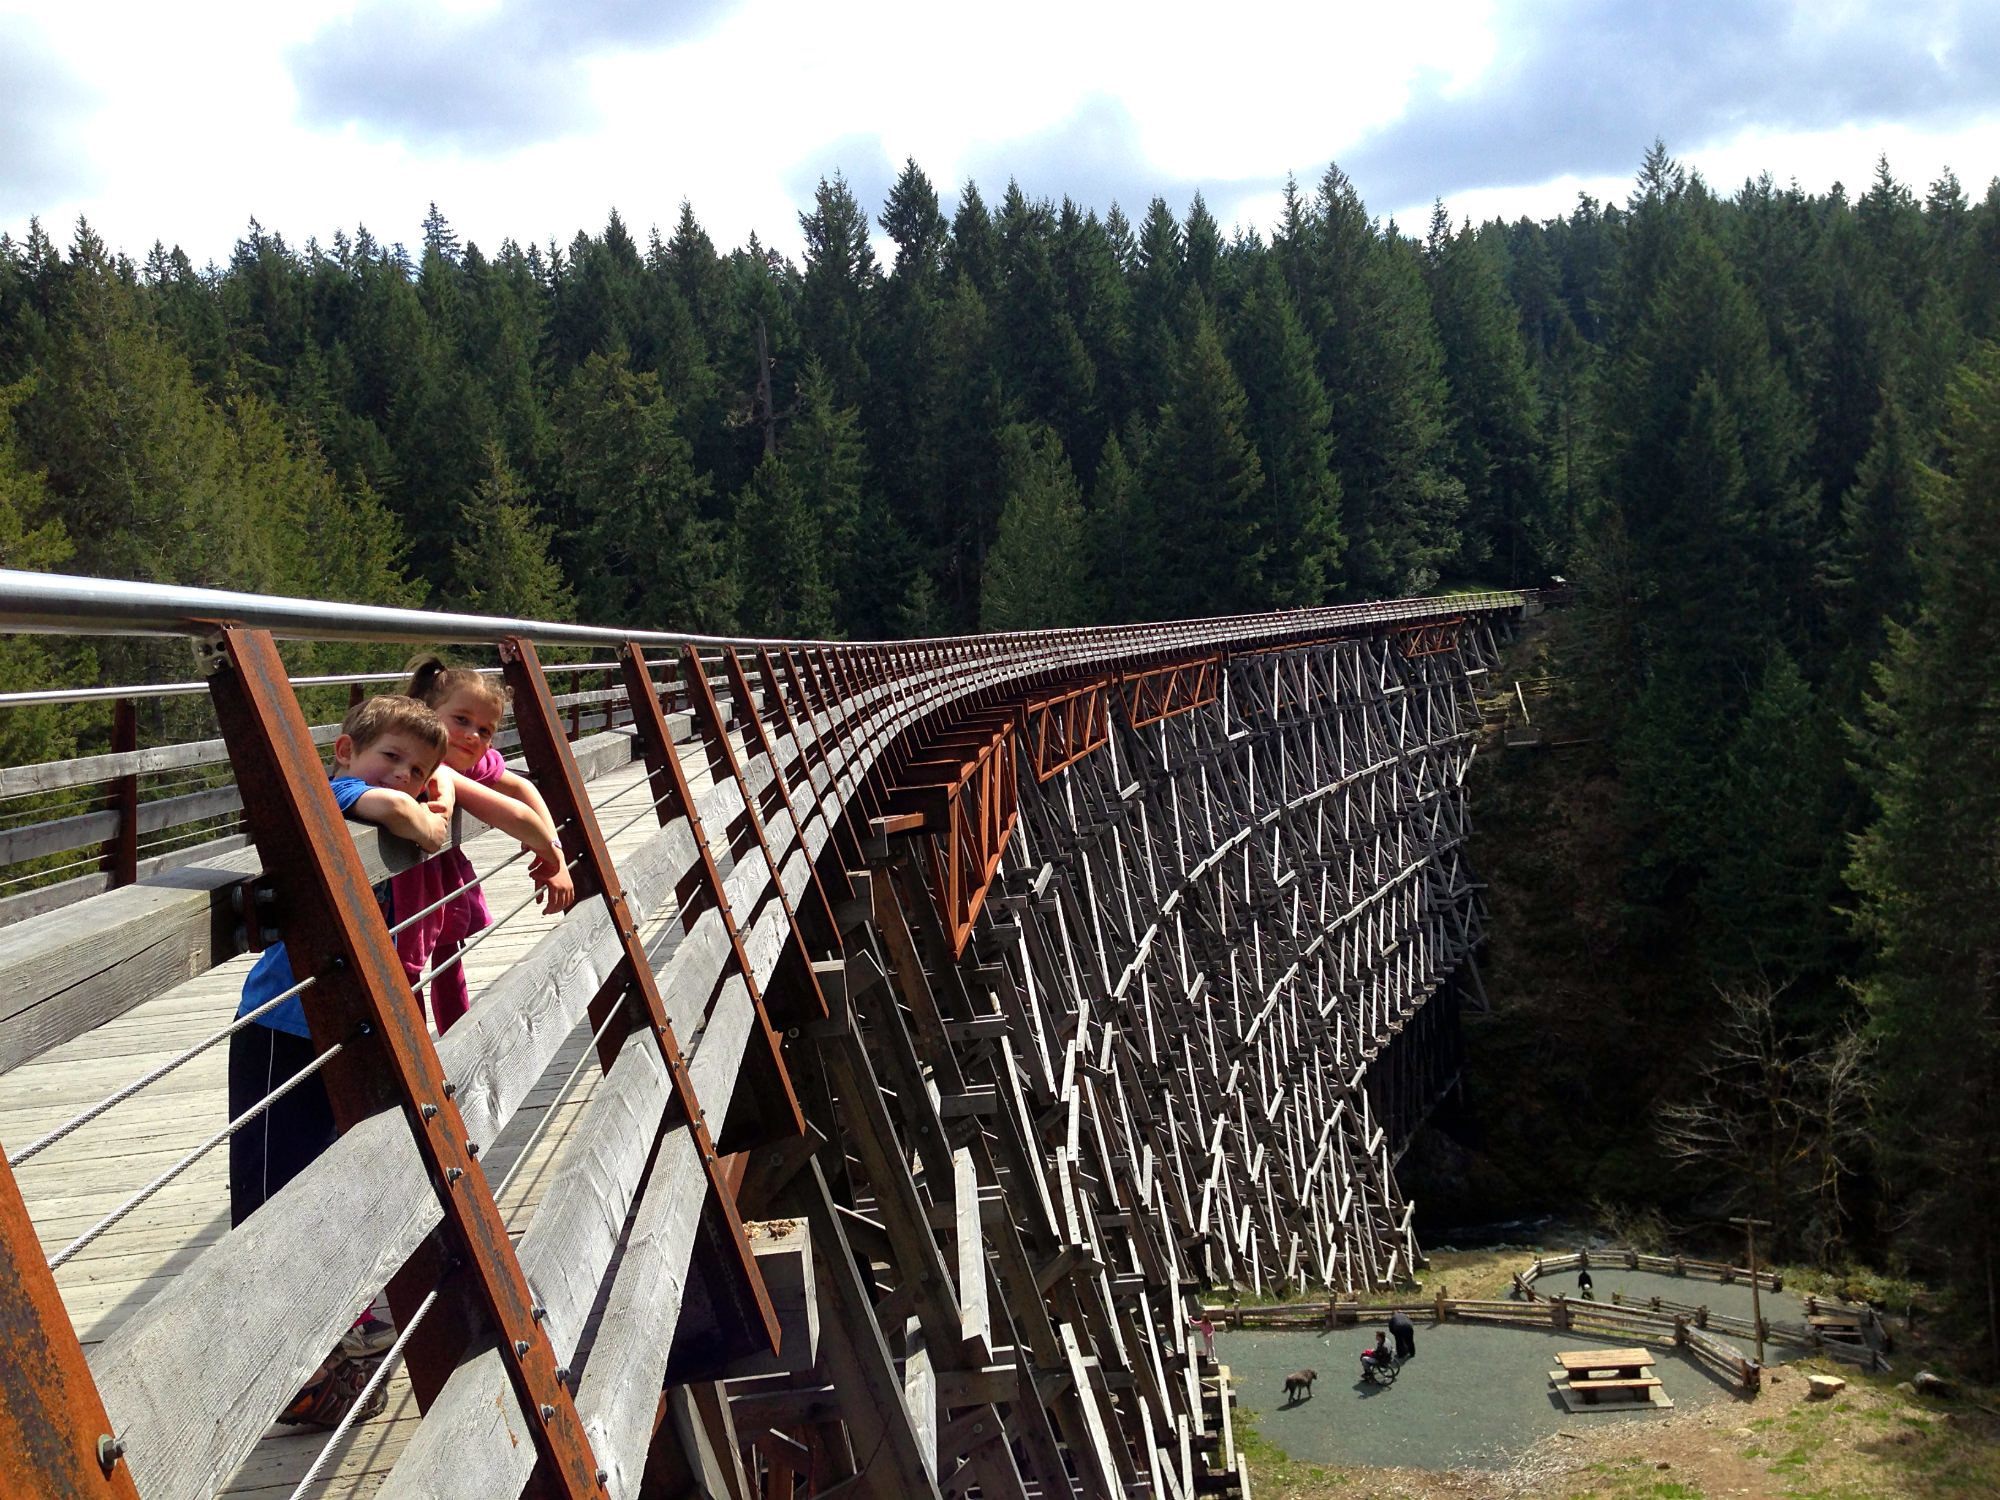 Kinsol Trestle, directions to kinsol trestle, where is kinsol trestle, kinsol trestle hiking trail